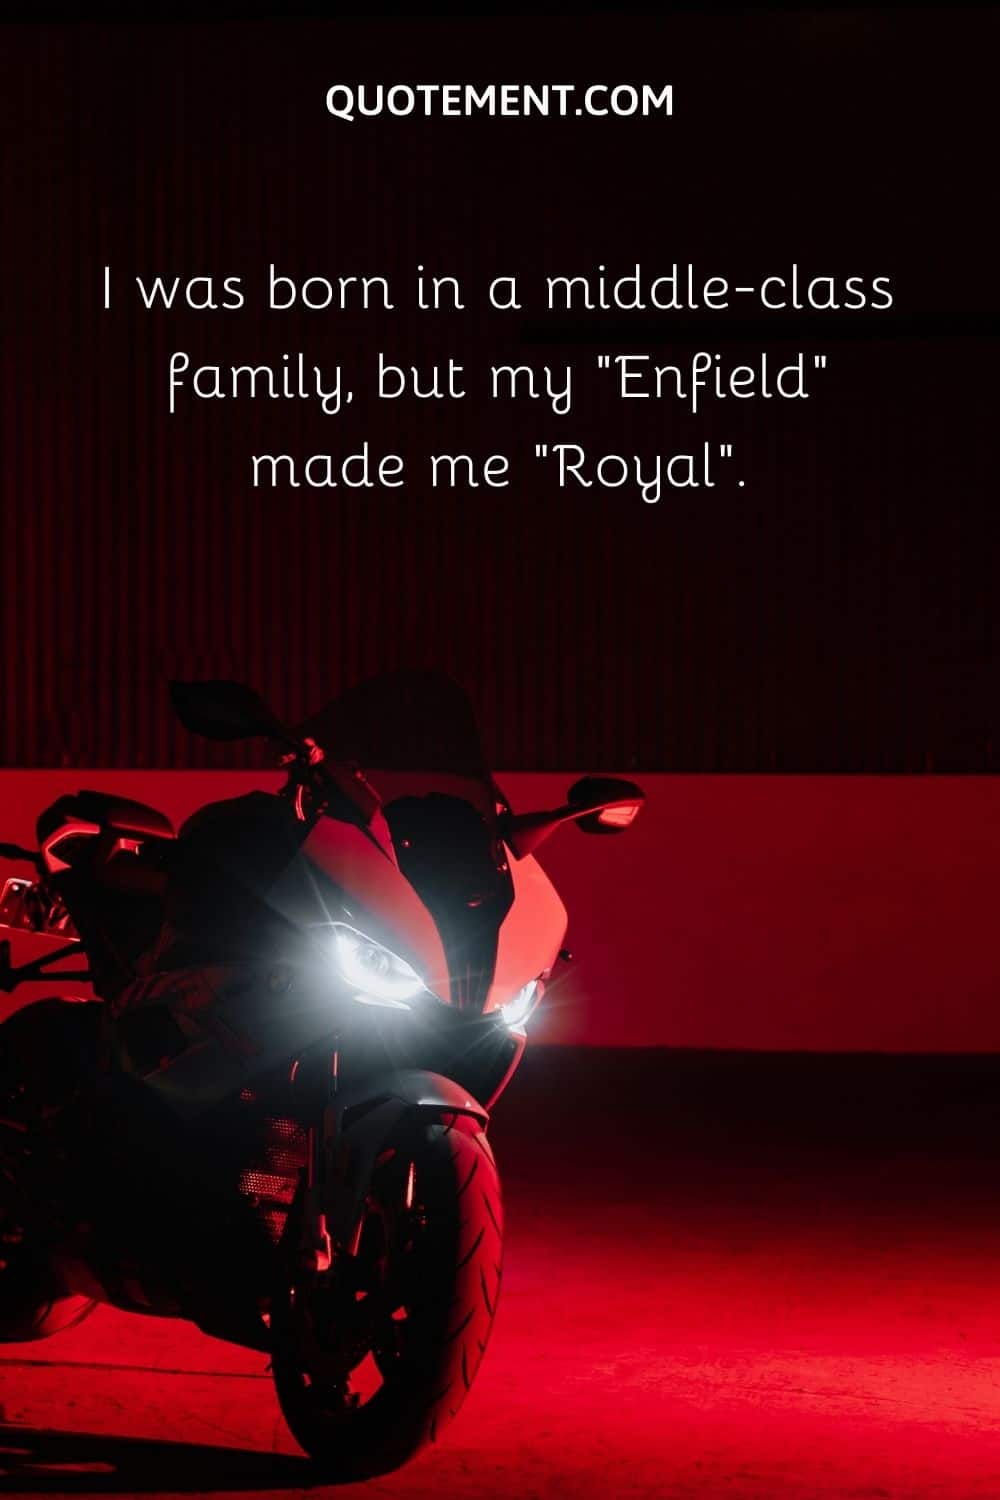 I was born in a middle-class family, but my “Enfield” made me “Royal”.